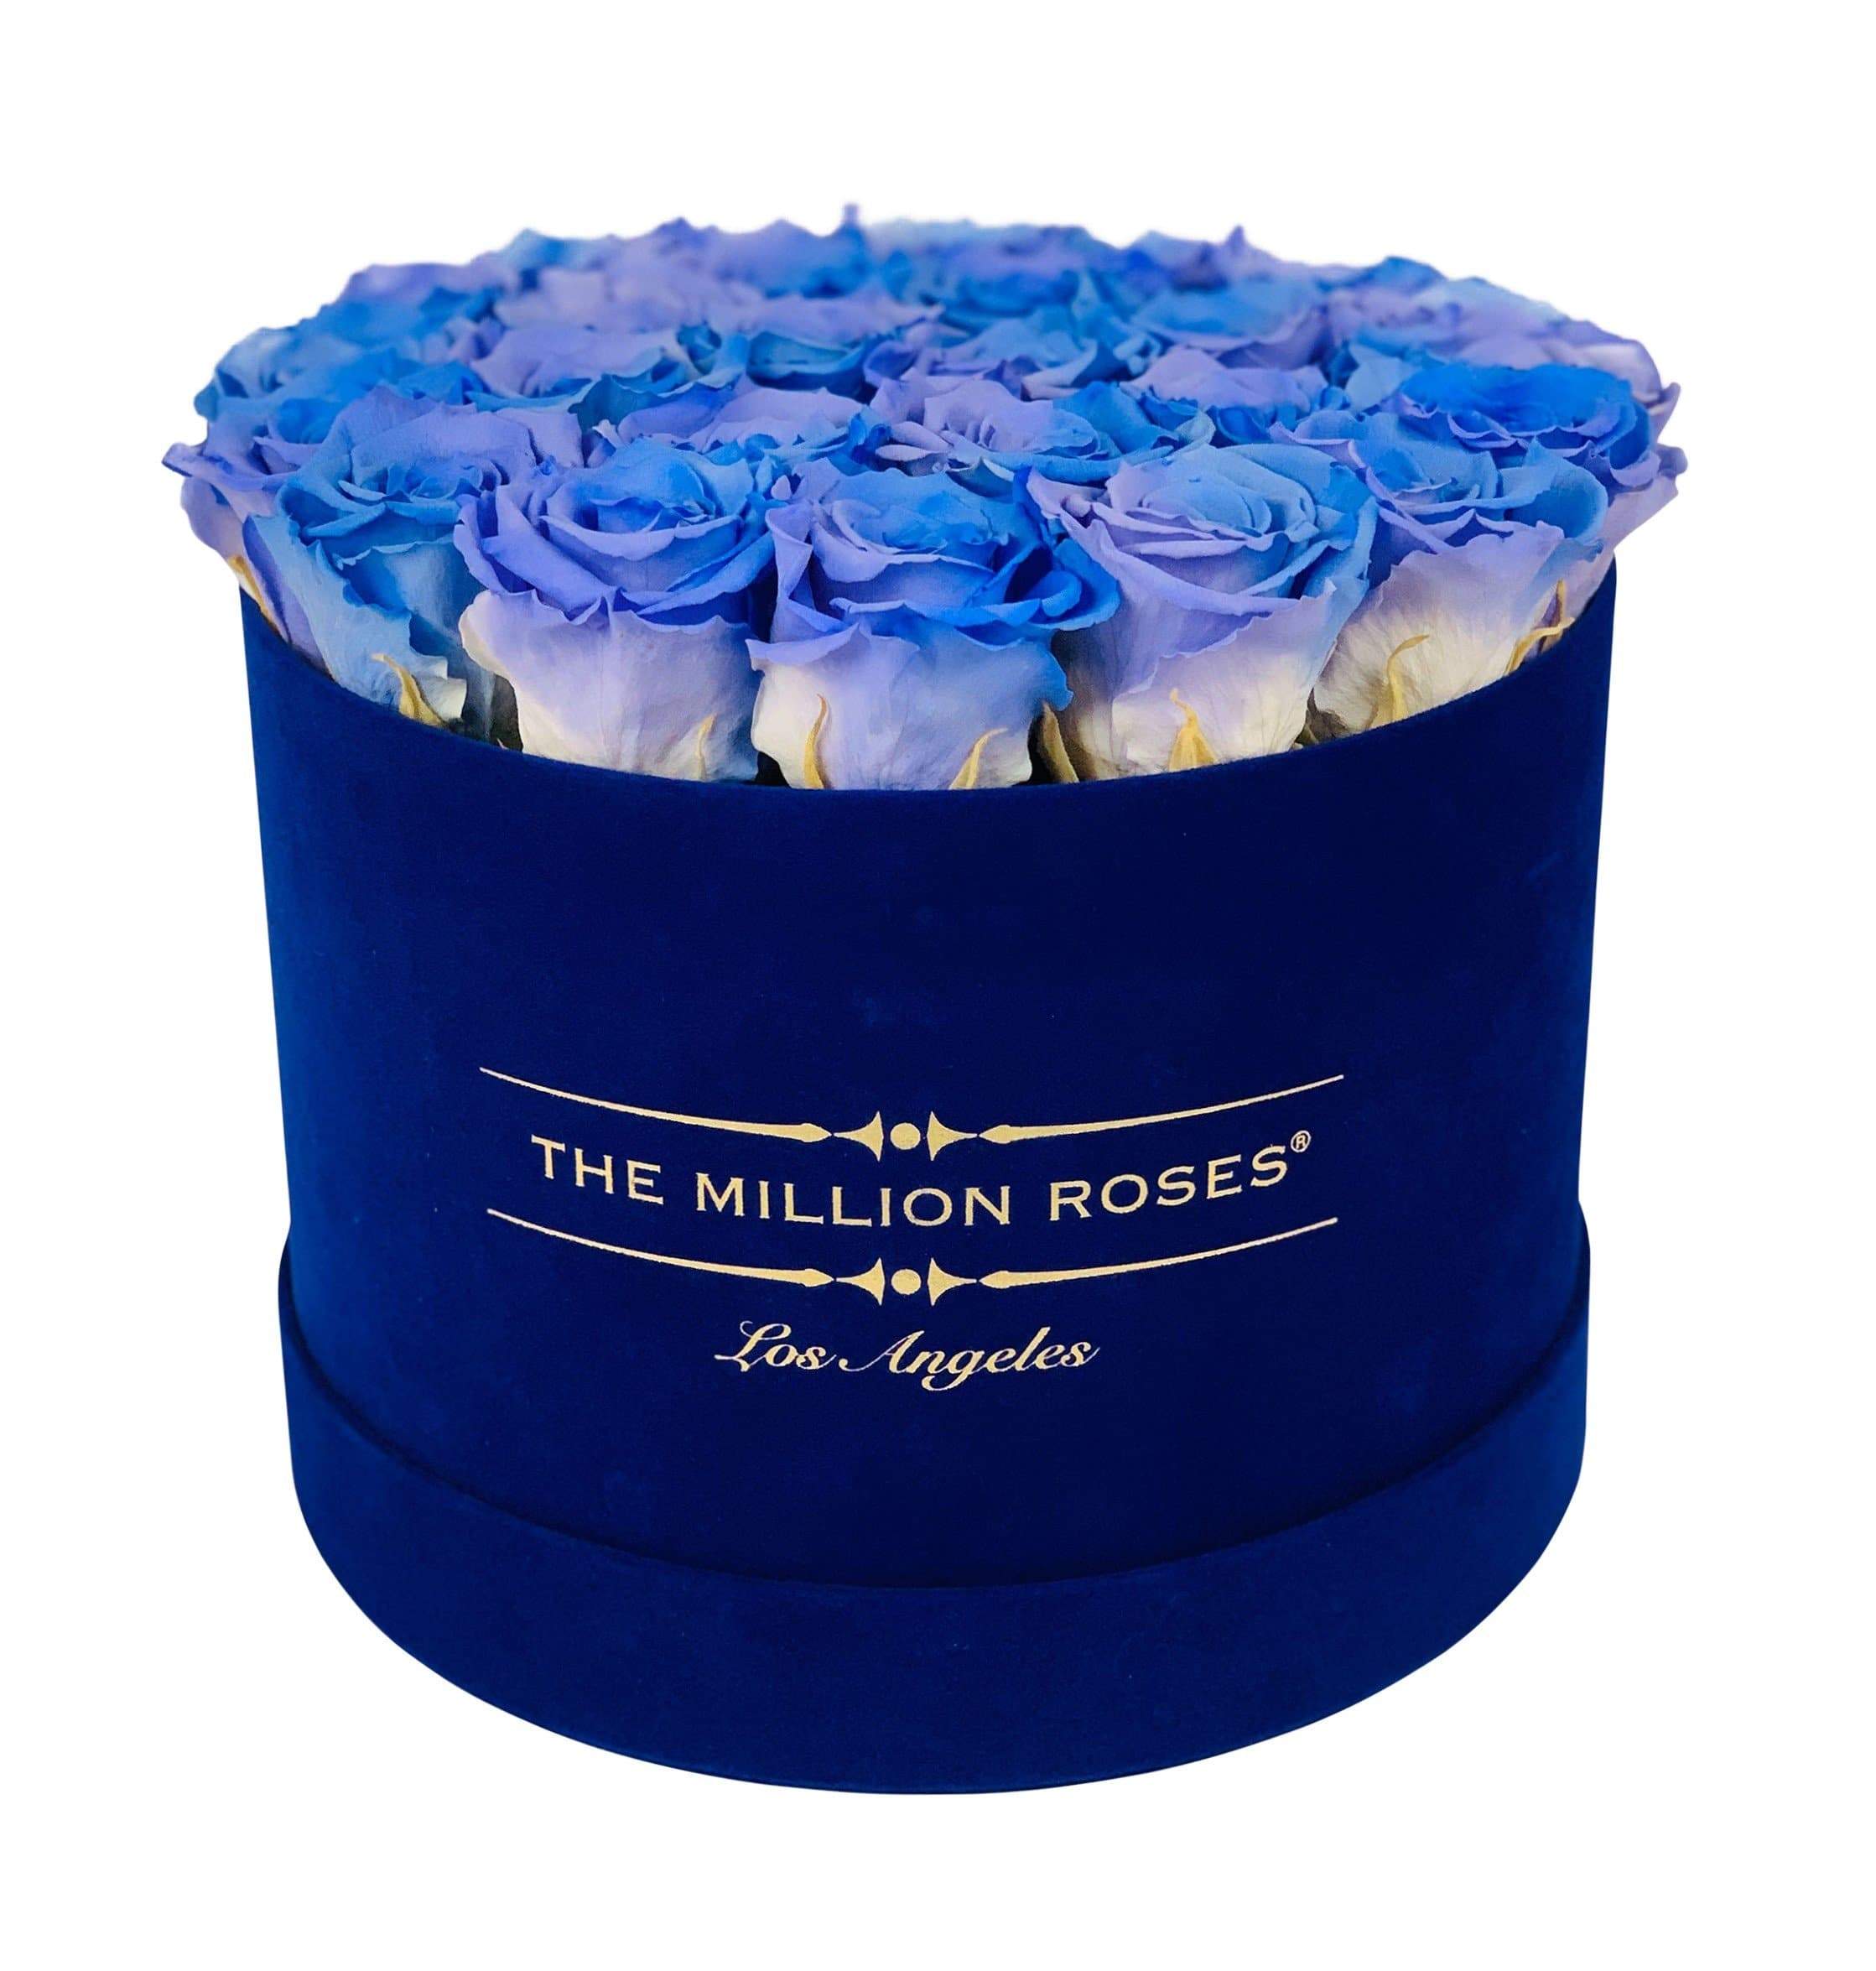 Supreme Royal Blue Suede Box | Violet Rainbow Roses - The Million Roses